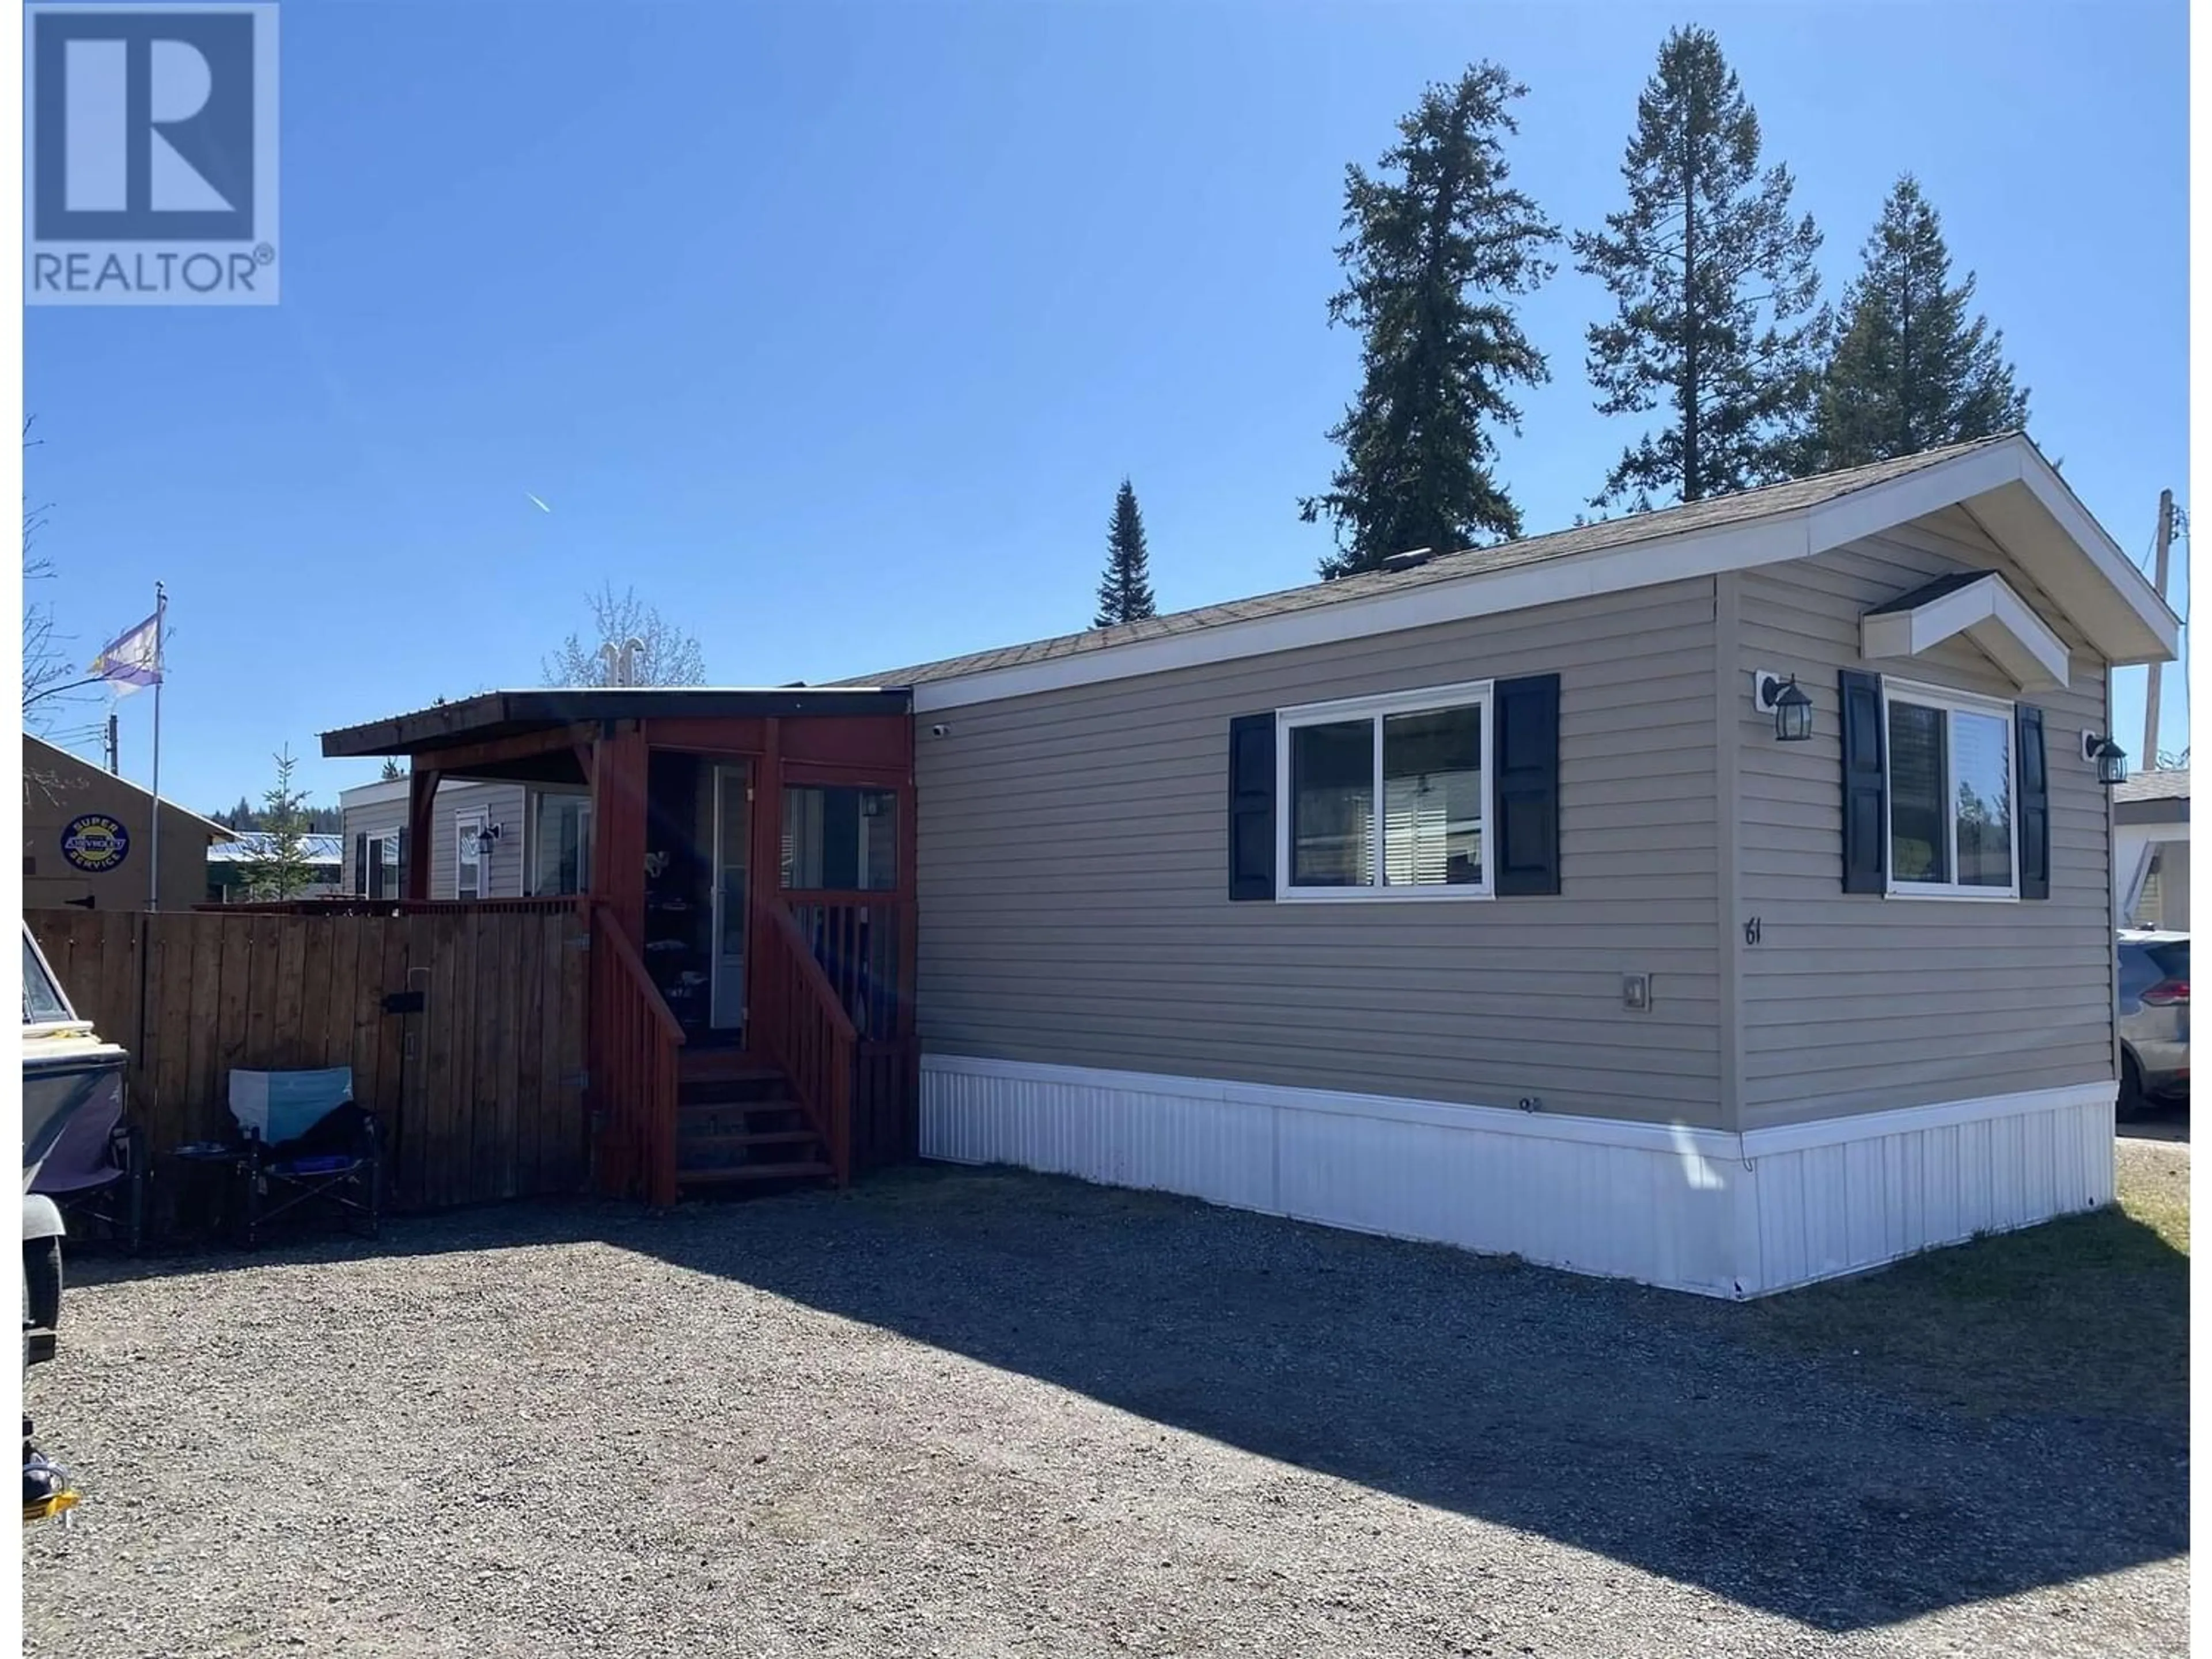 Home with vinyl exterior material for 61 5125 NORTH NECHAKO ROAD, Prince George British Columbia V2N6S9